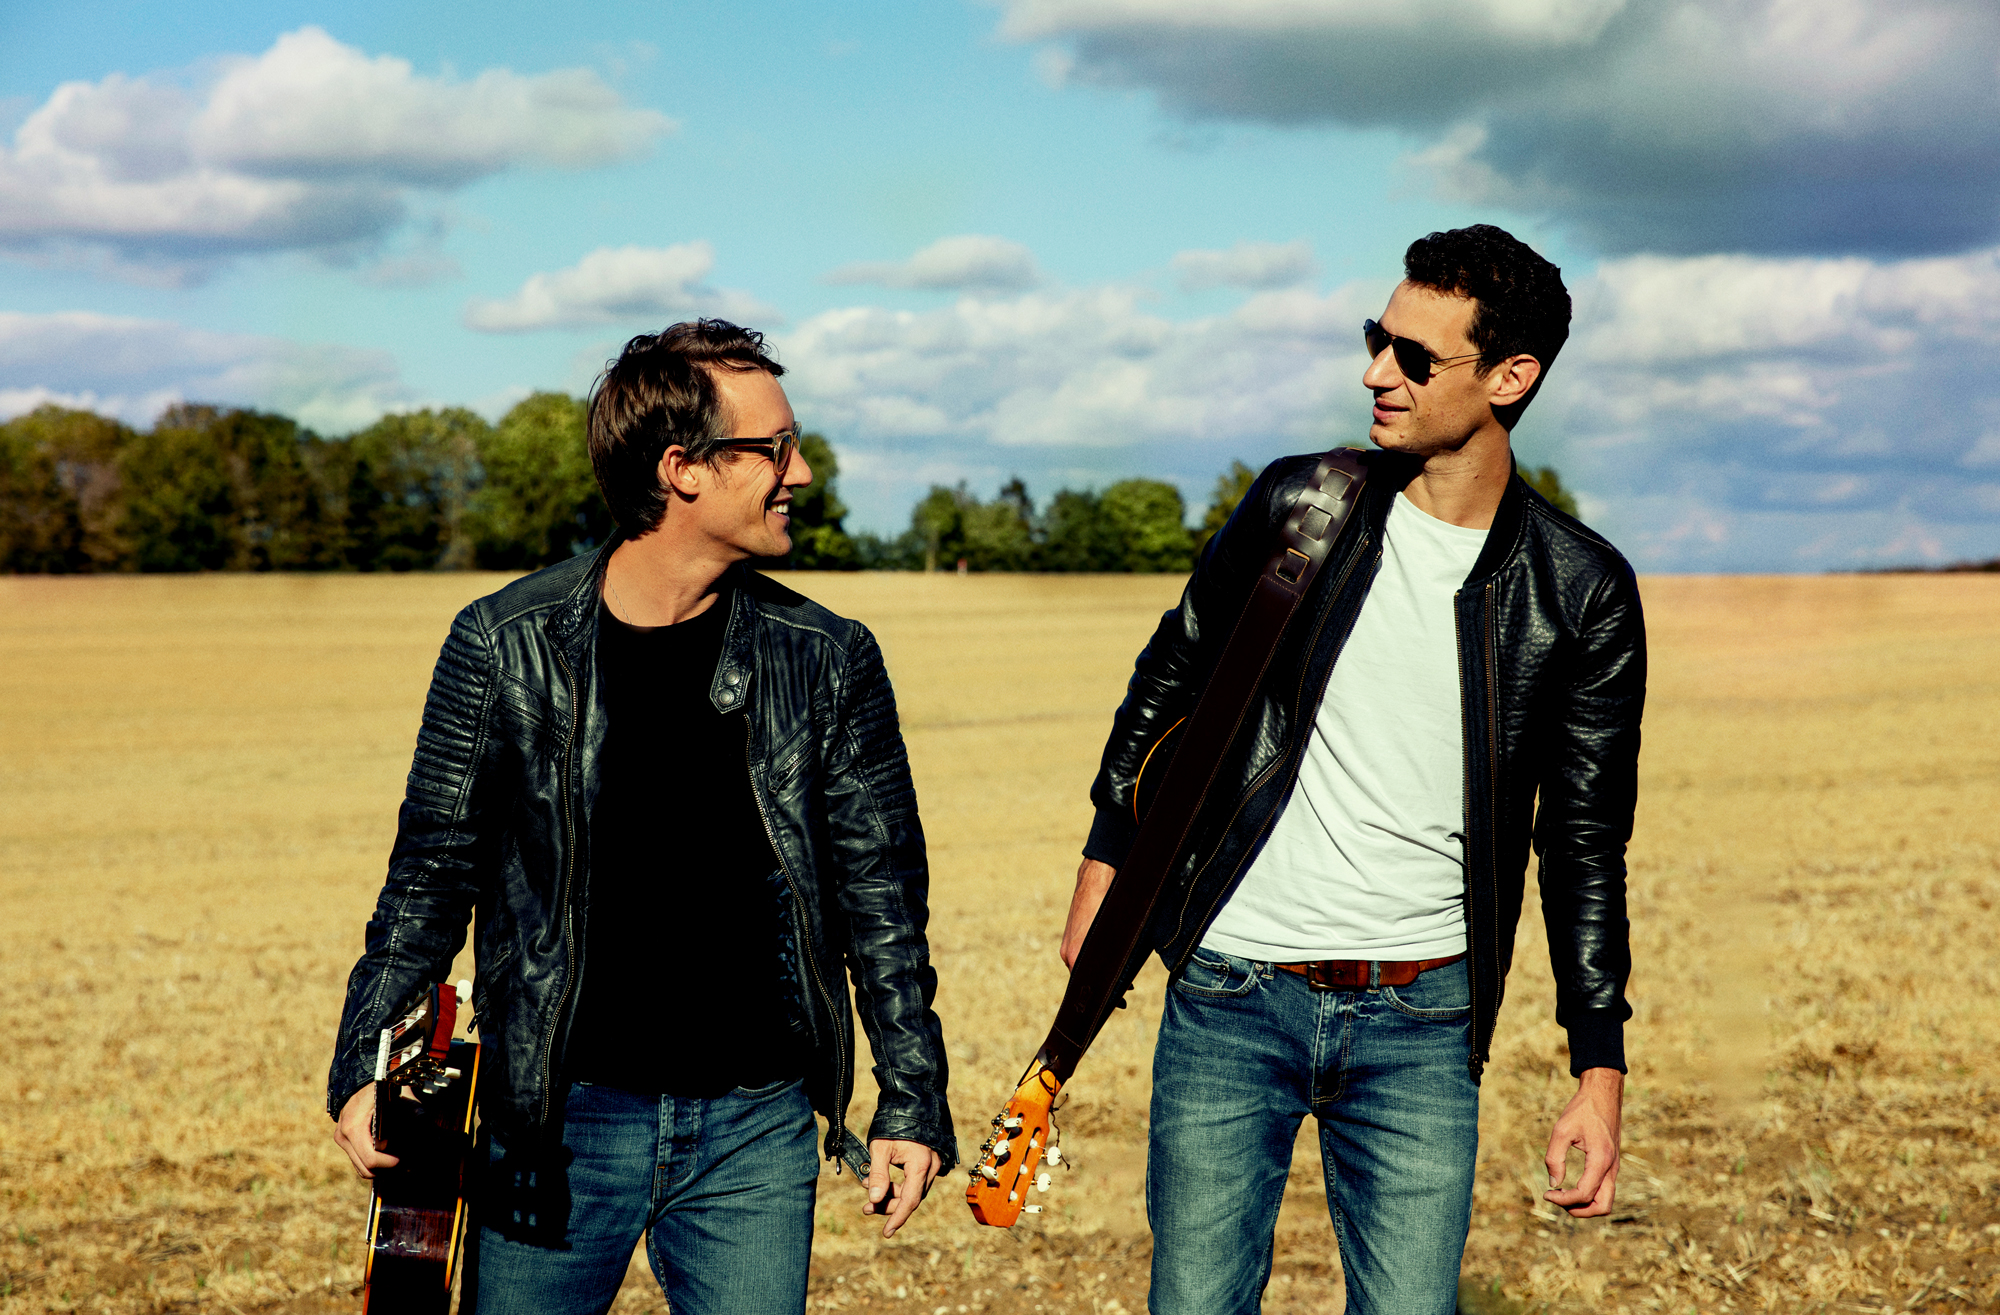 The band duo dressed in leather jackets and holding guitars walking through a field